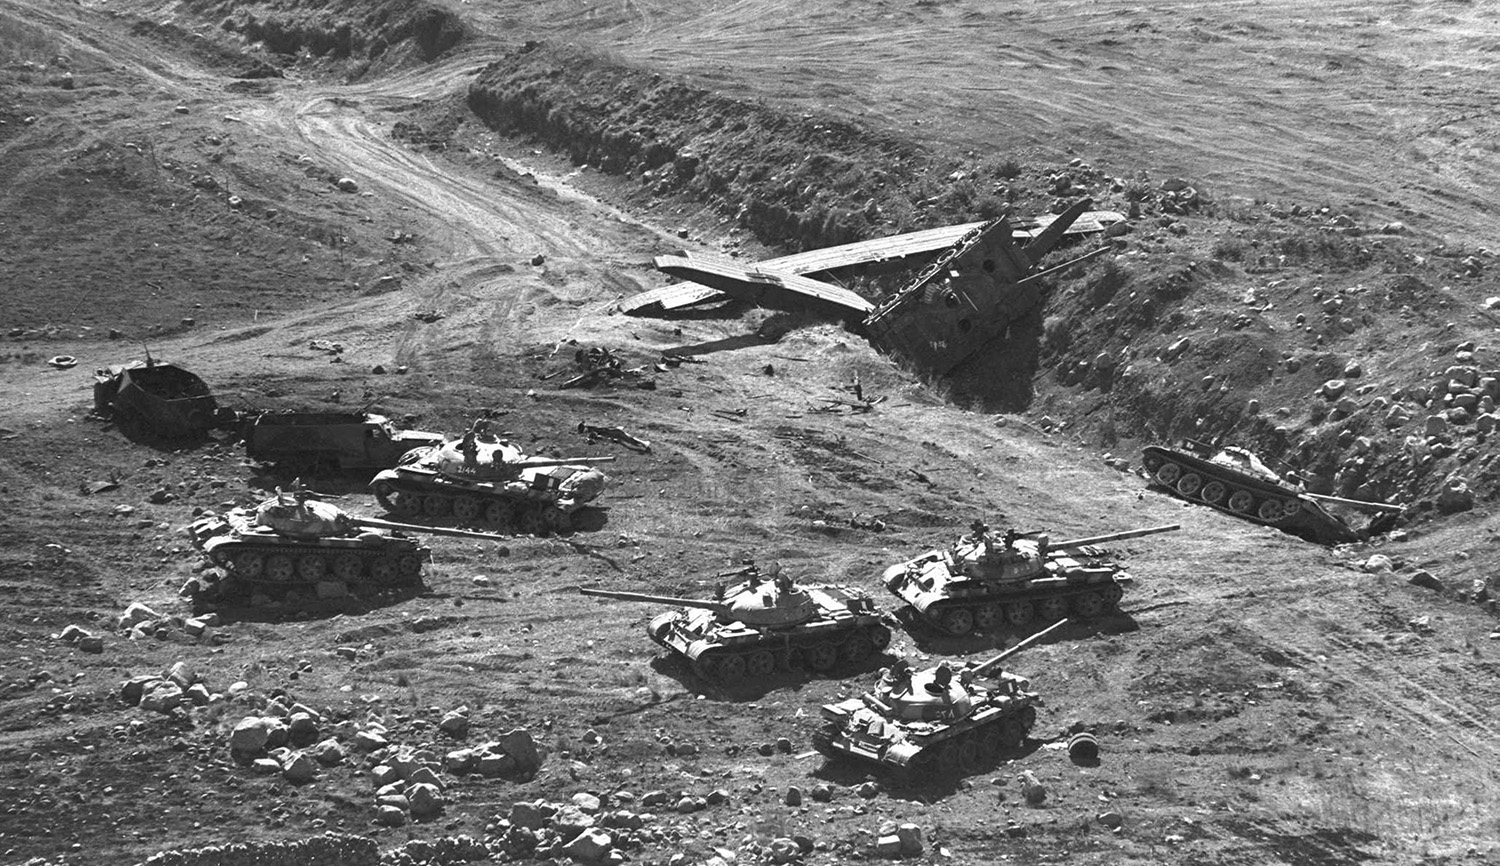 Destroyed Syrian tanks and engineering equipment on October 13, 1973 in the Golan Heights. Eitan Haris/GPO/Getty Images.
